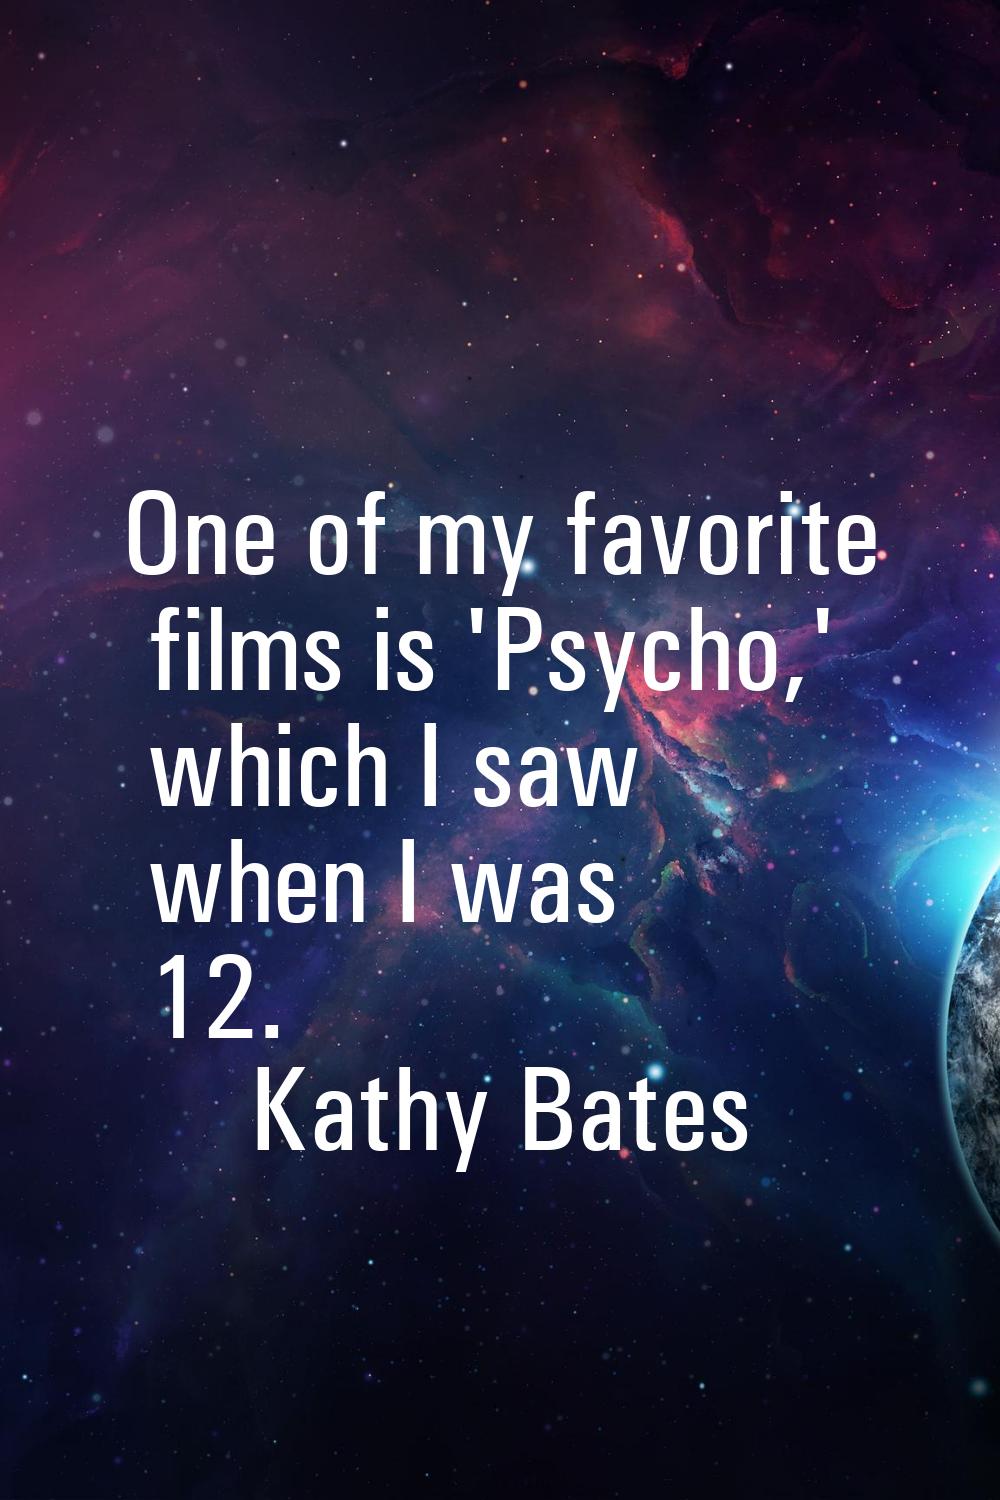 One of my favorite films is 'Psycho,' which I saw when I was 12.